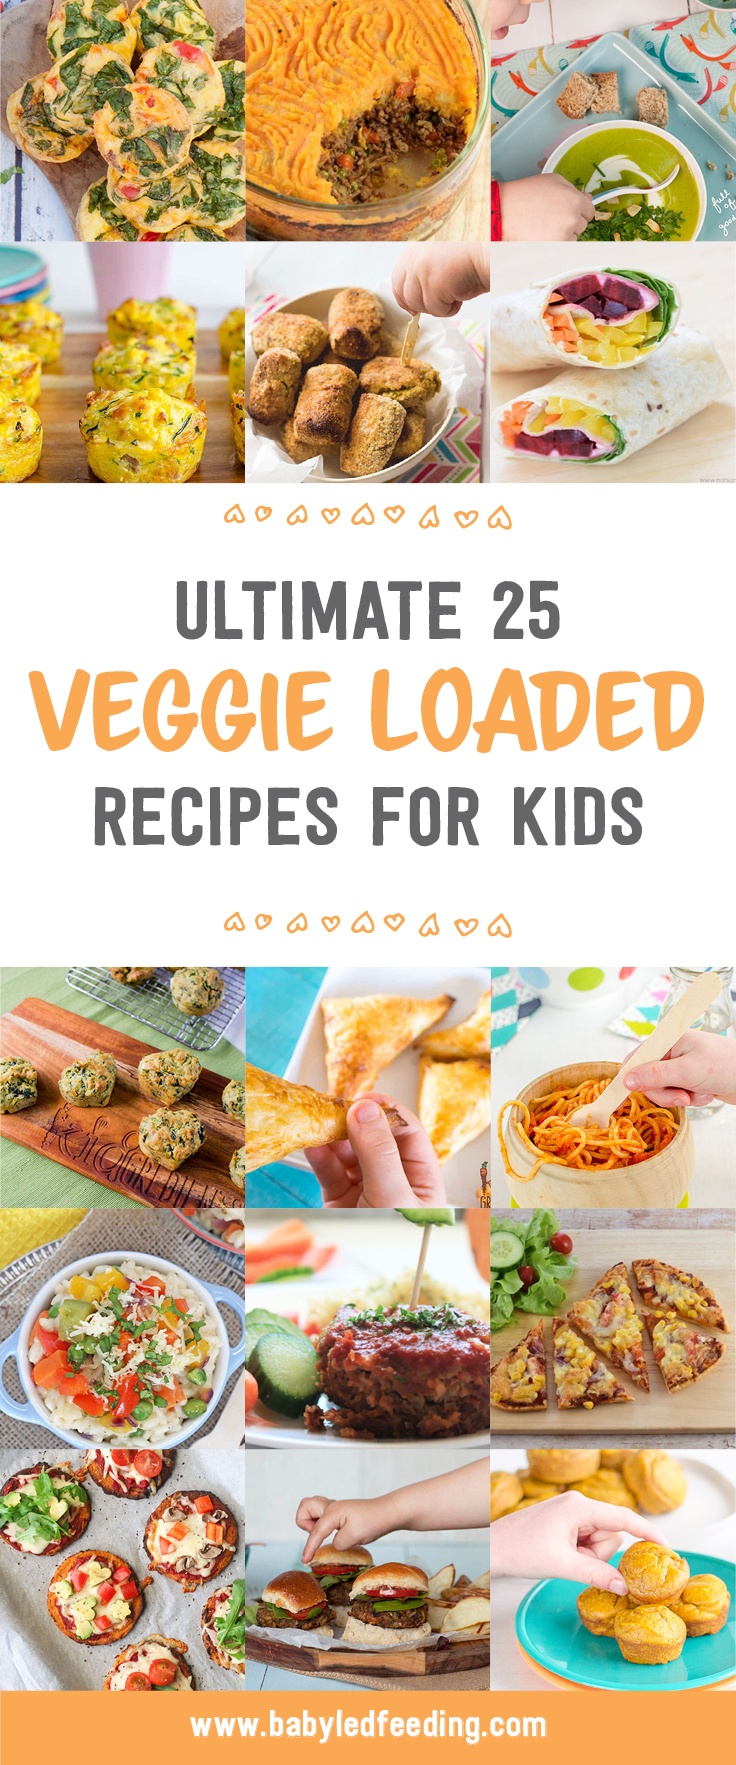 Ultimate list of easy vegetable loaded recipe for picky toddlers and babies. These hidden veggie recipe are kid friendly, low salt, and low butter/ no butter. Add these yummy recipe to your family meal planning! #veggierecipe #pickytoddler #pickyeater #fingerfood #familymeals